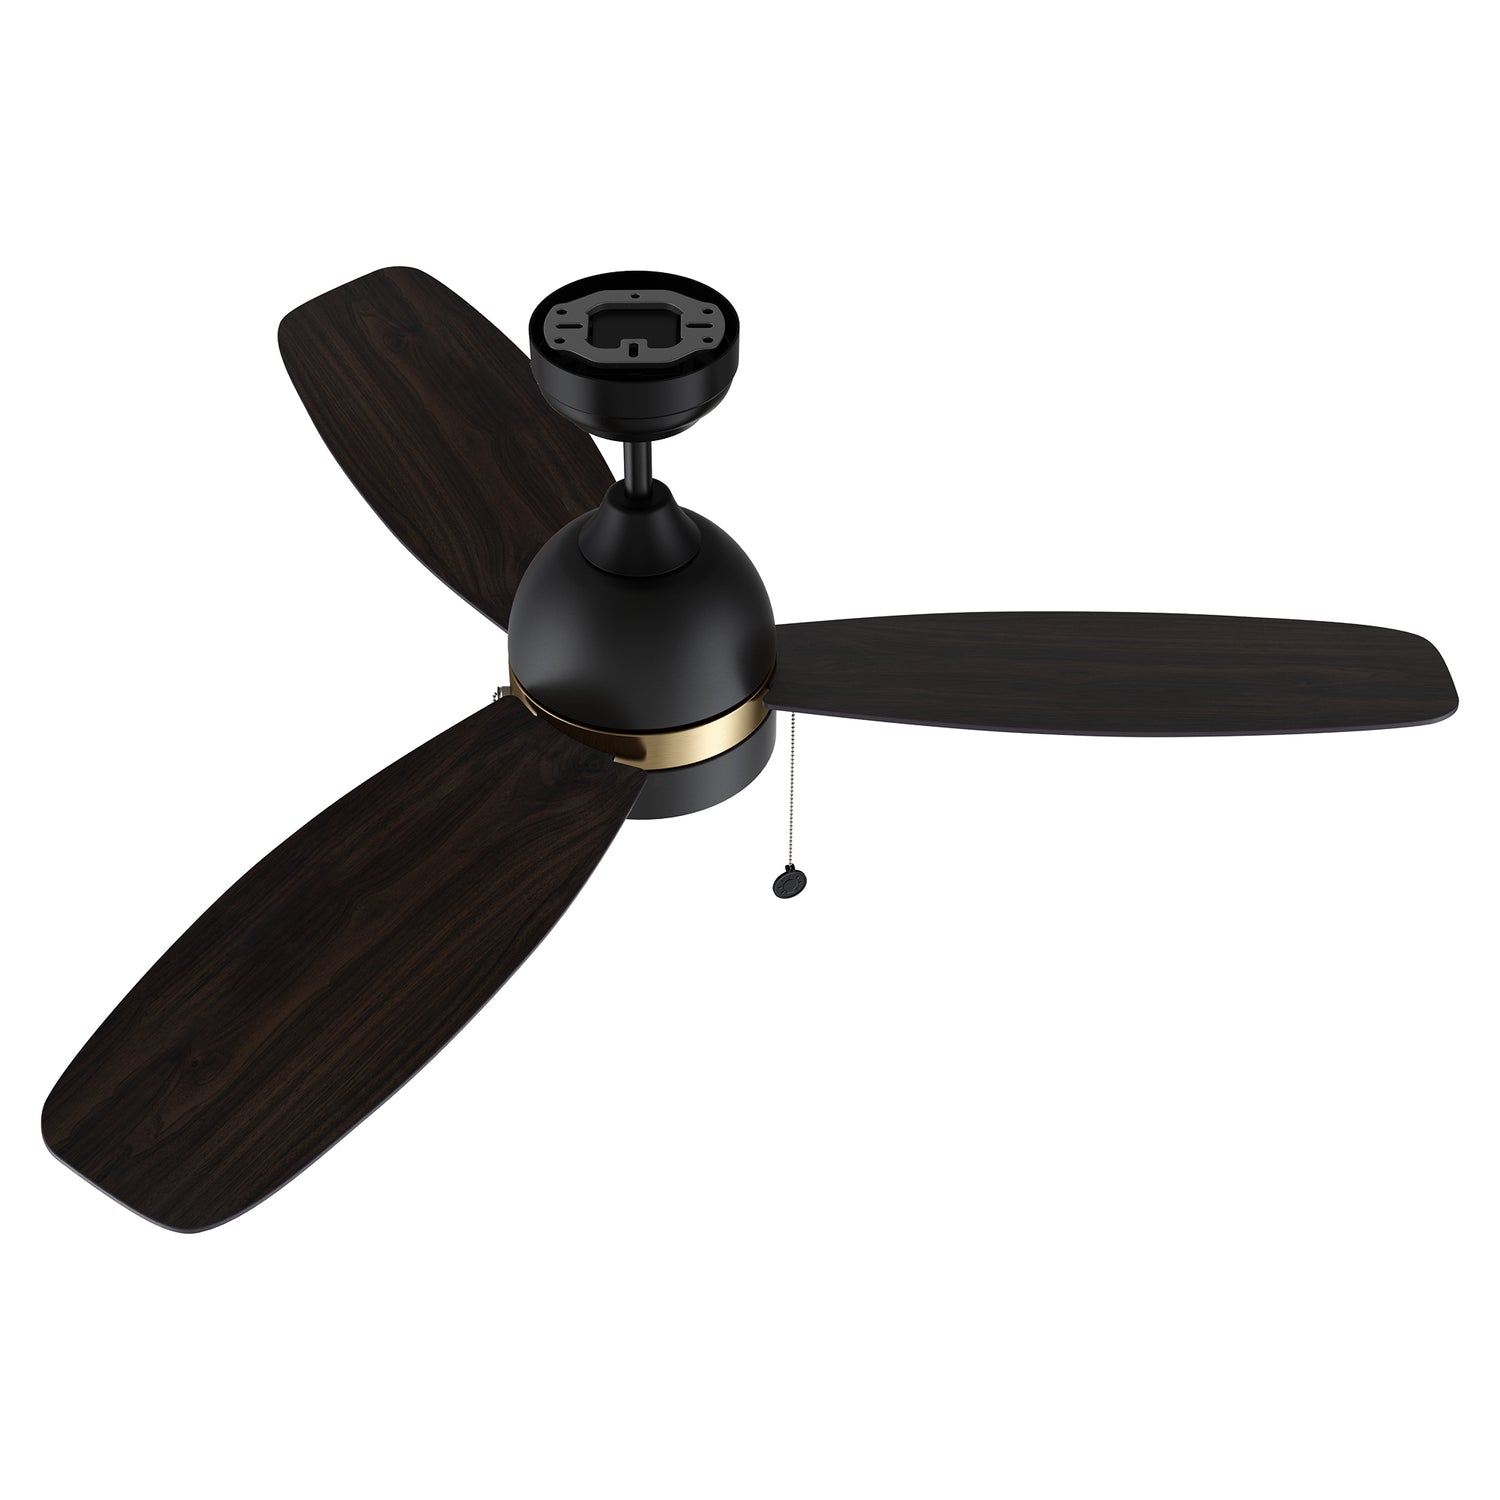 Striking and natural dark wood finish on the fan blades. Enhances the Carro Tesoro pull chain ceiling fan&